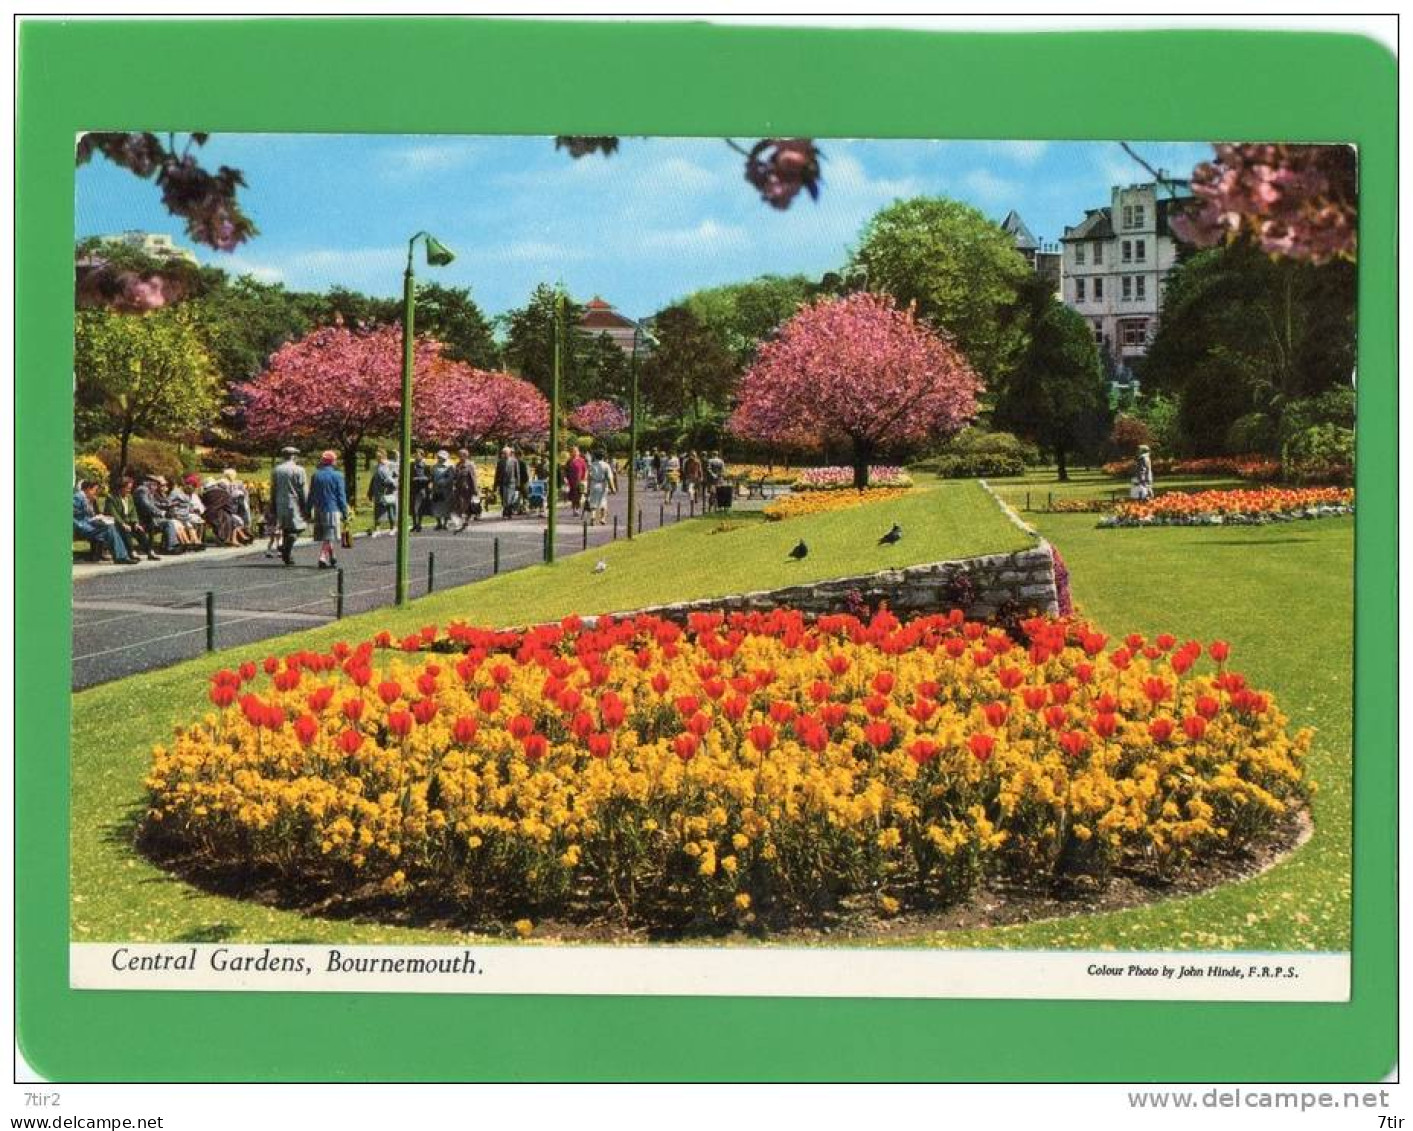 CENTRAL GARDENS BOURNEMOUTH - Bournemouth (until 1972)